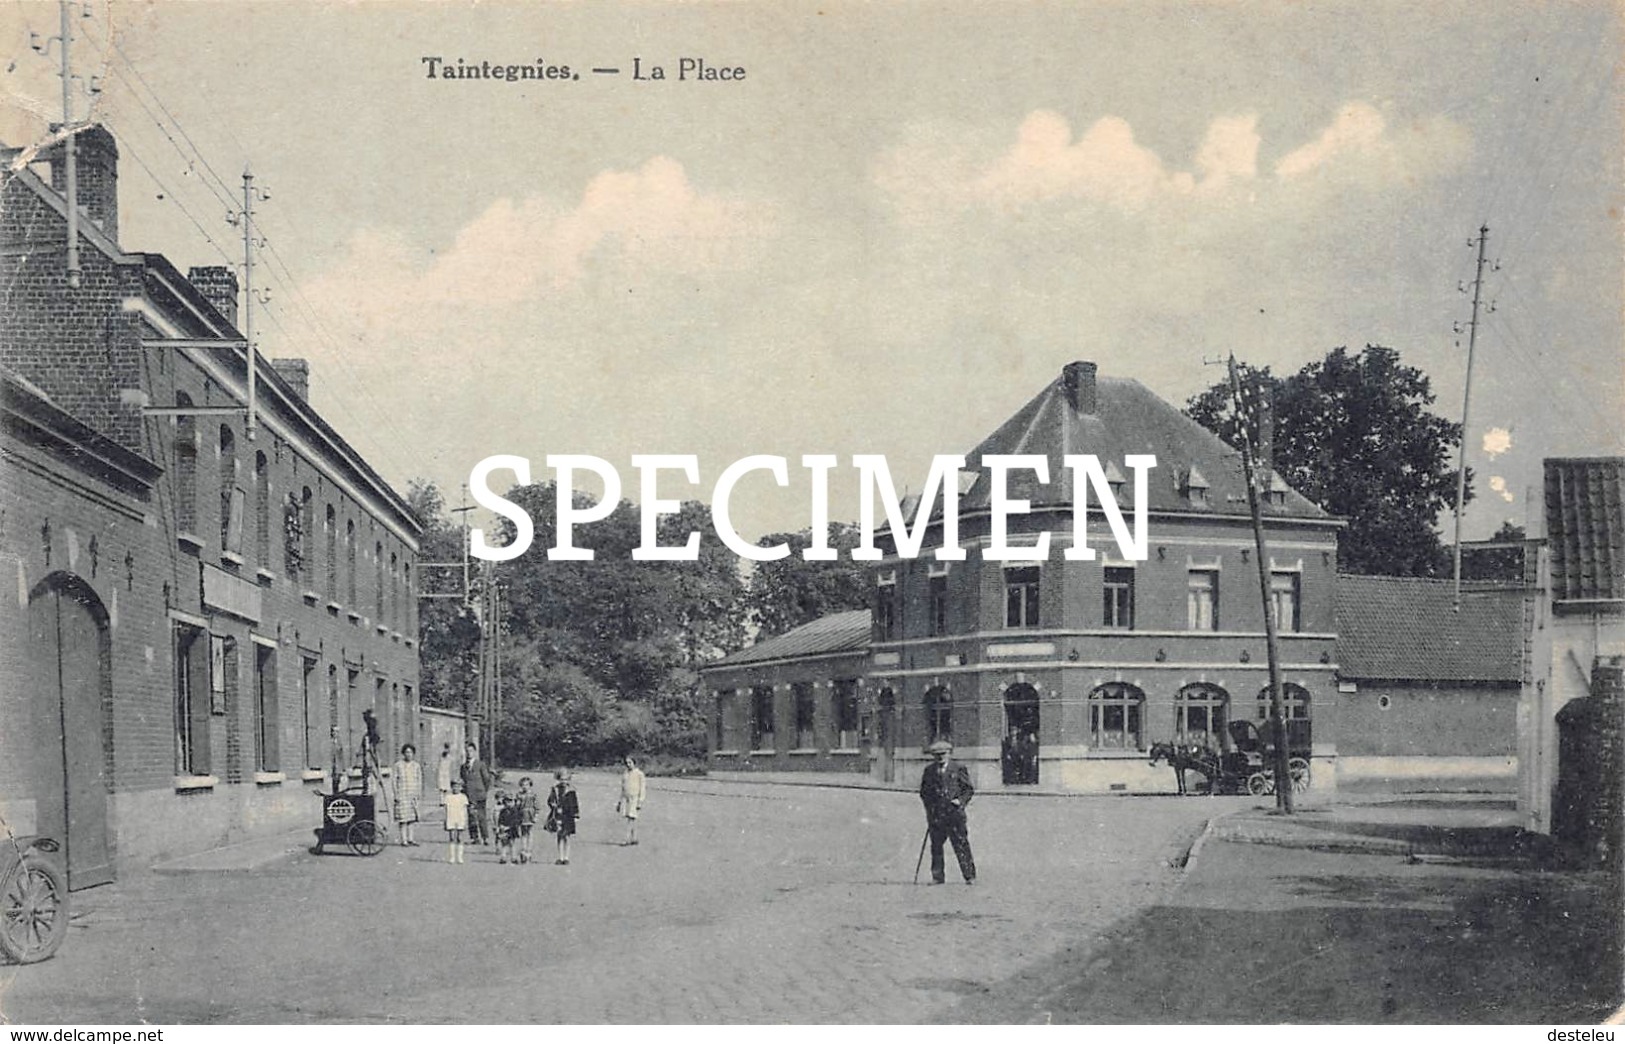 La Place - Taintignies - Rumes